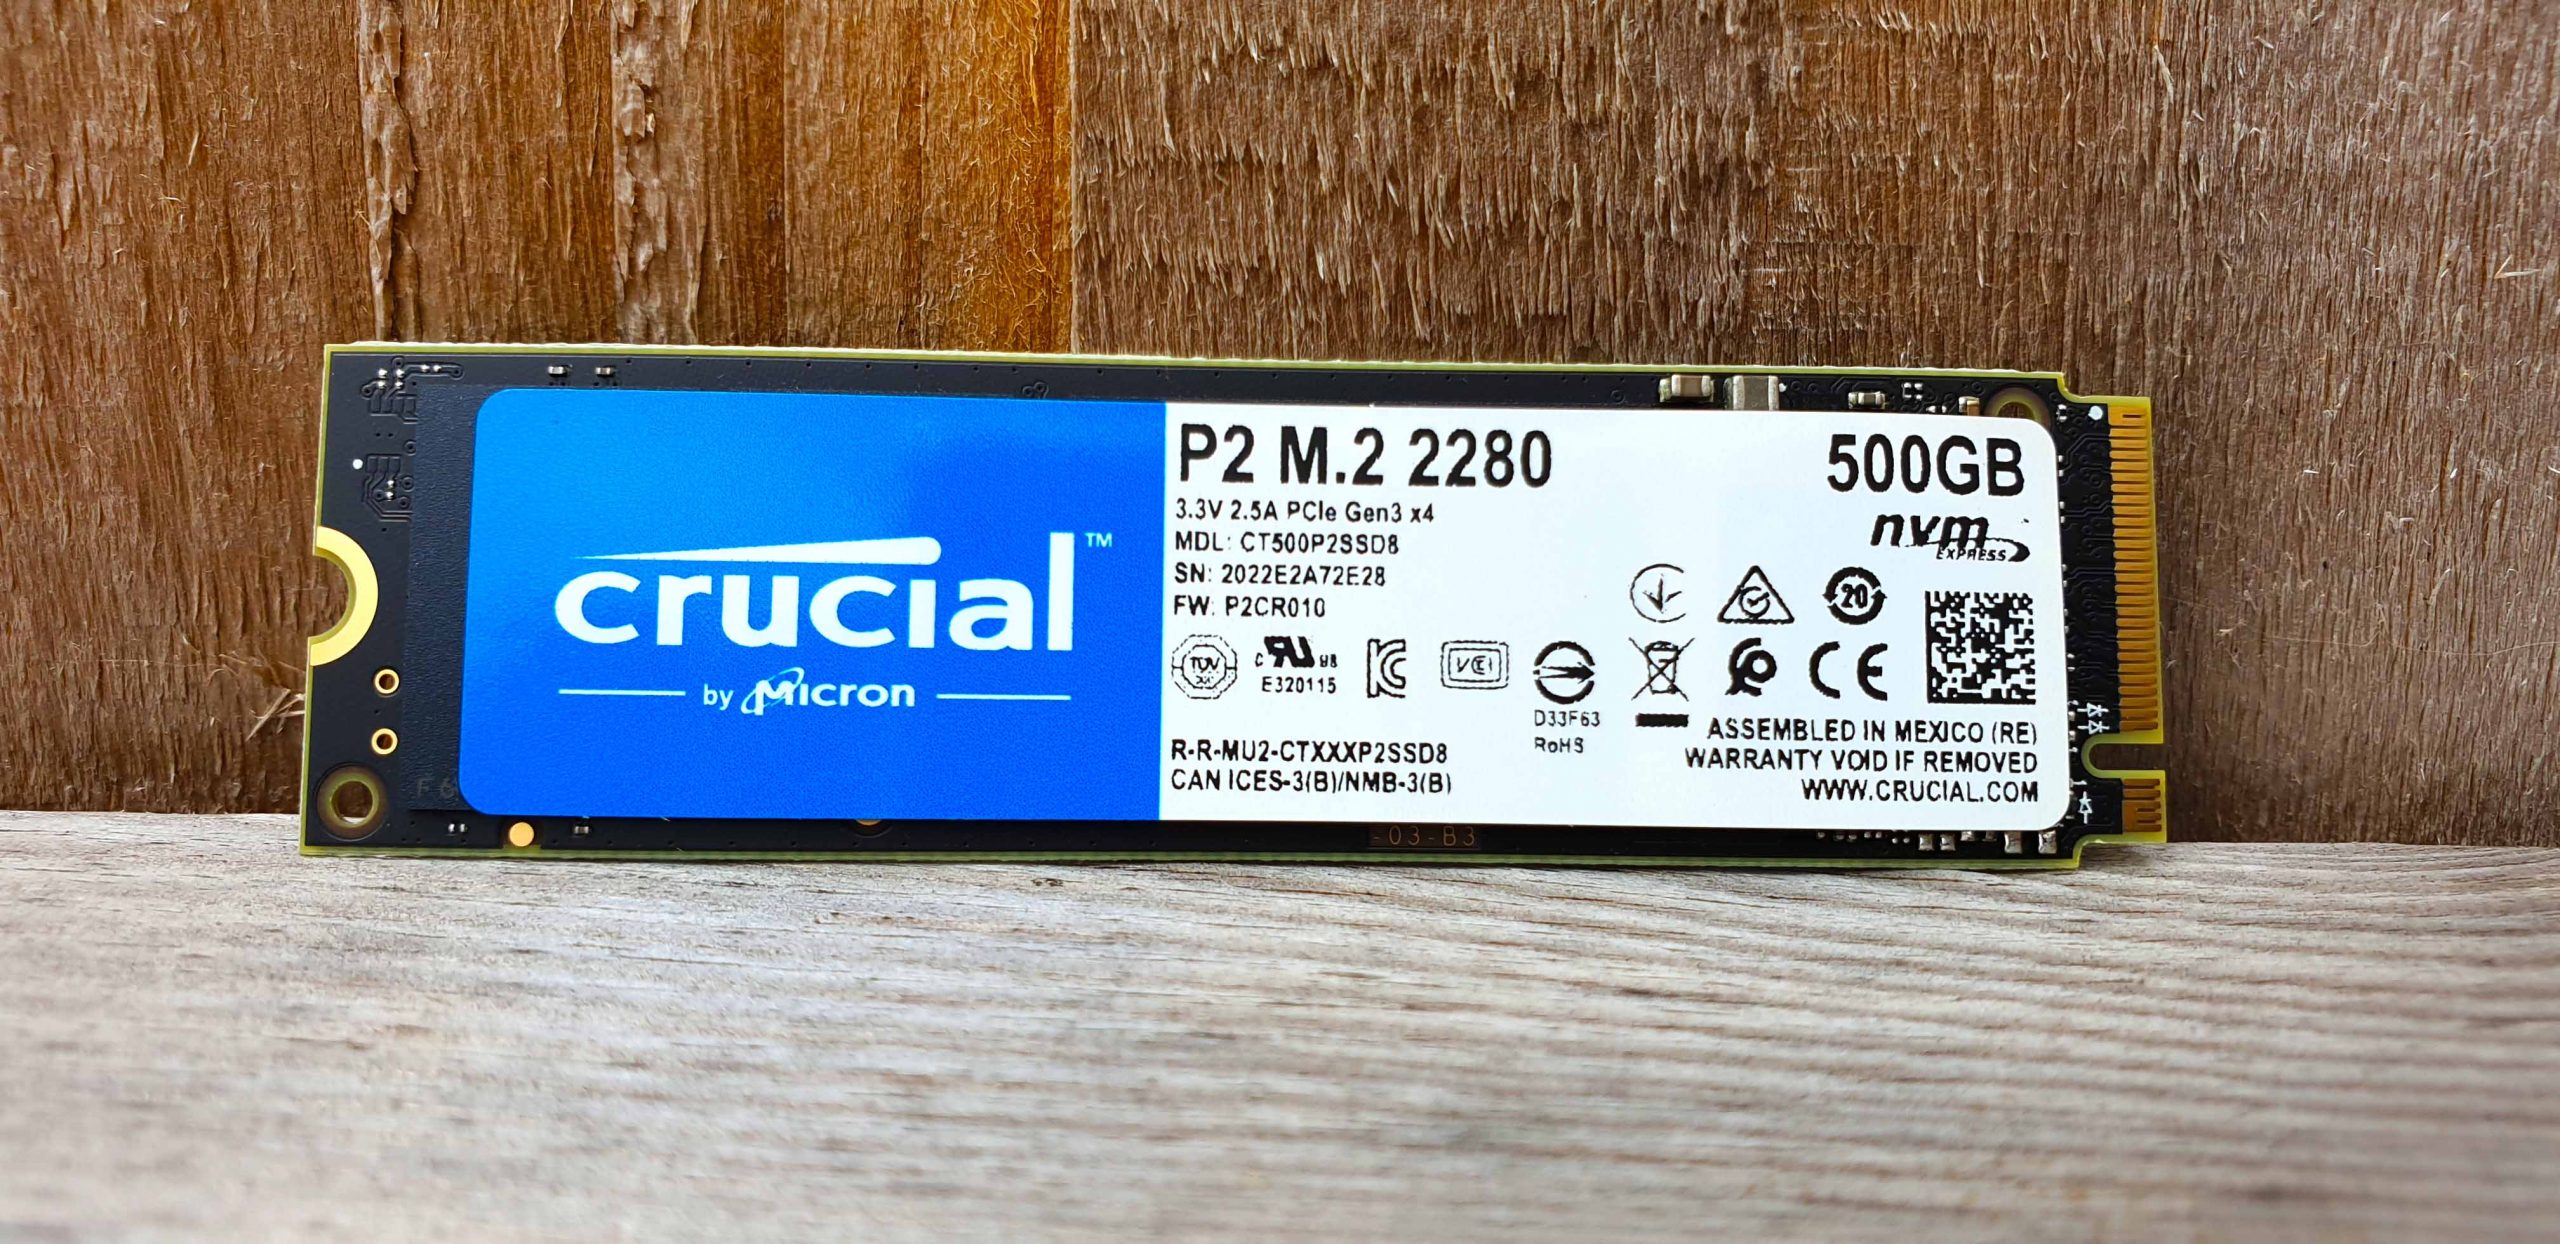 500GB Crucial P2 NVME M.2 SSD with cloning kit